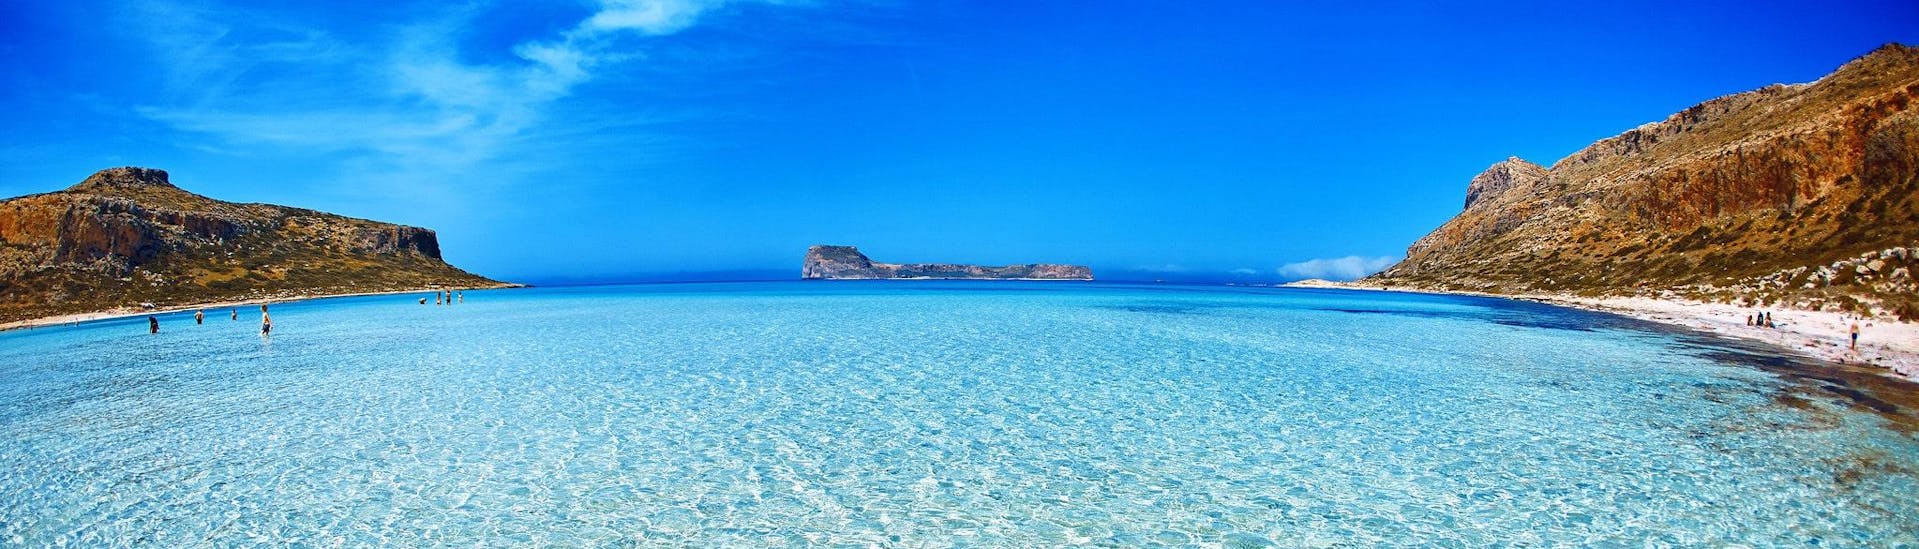 The stunning Balos Lagoon, which can be visited during many boat trips from Chania.